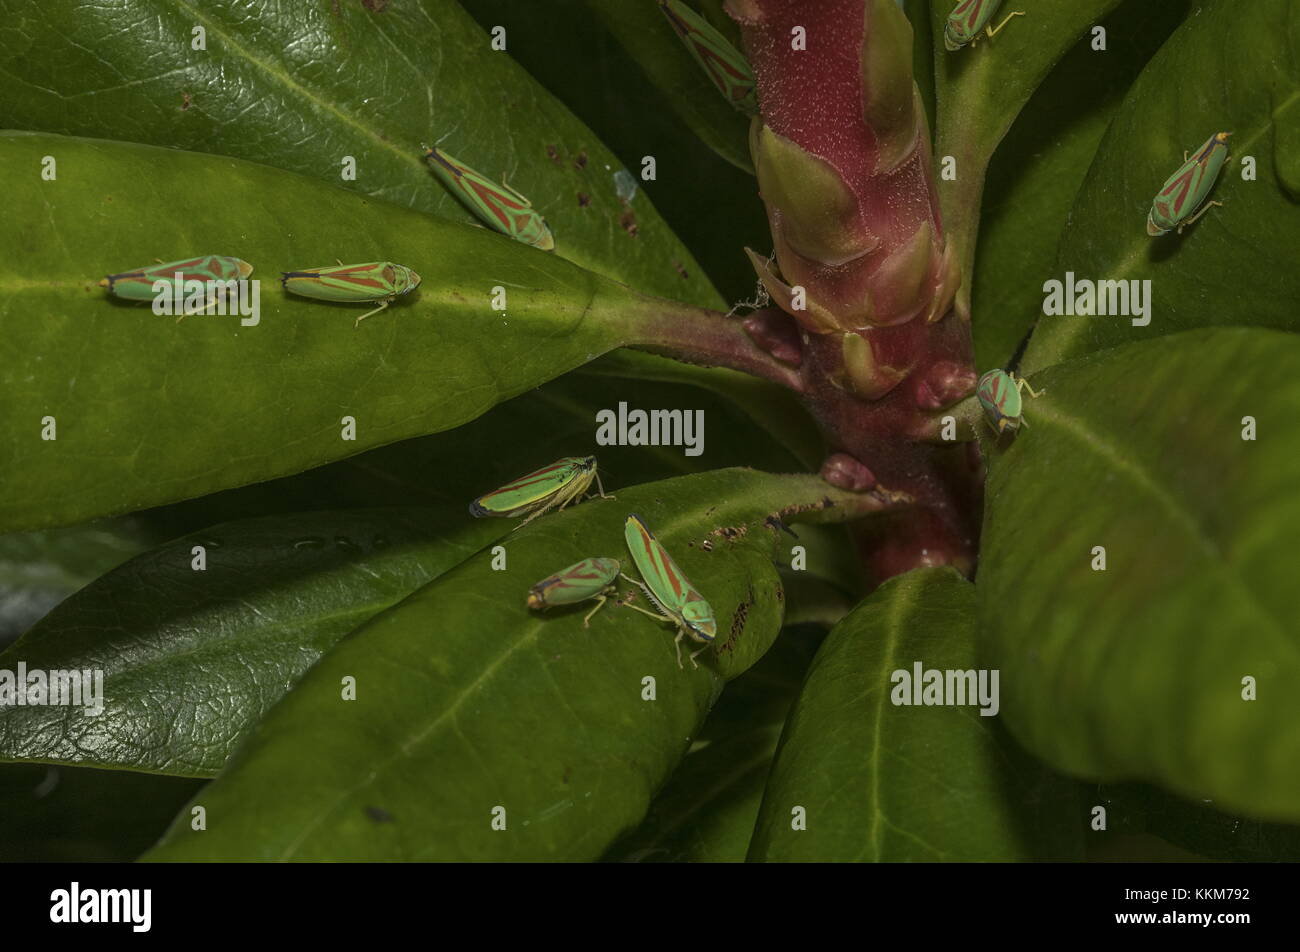 Rhododendron leaf-hoppers, Graphocephala fennahi on Rhododendron leaves. Stock Photo